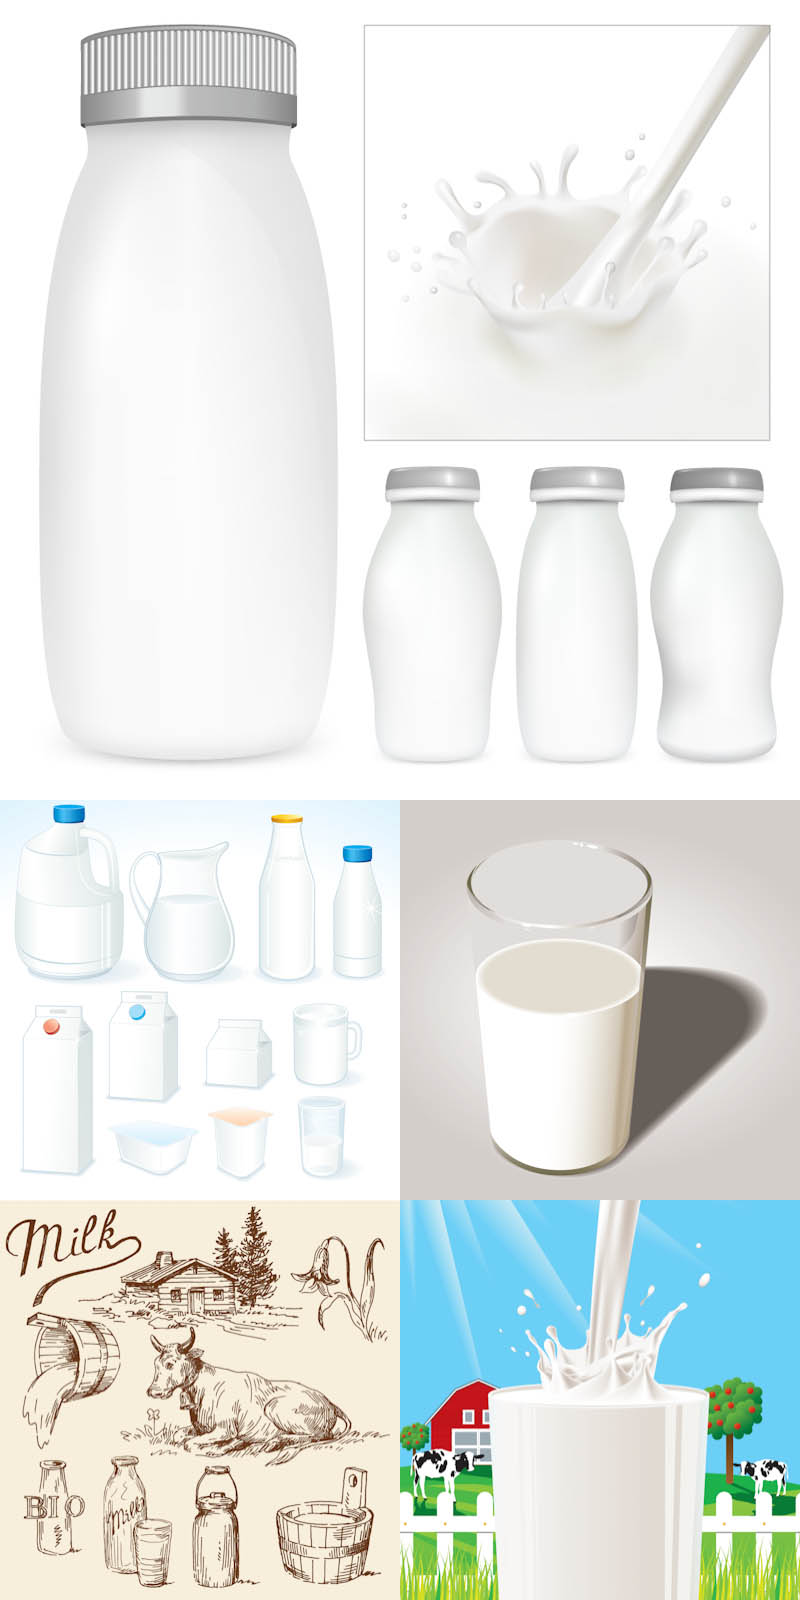 5 sets with vector milk clipart. Contains different bottles with milk, glass of milk and some vintage milk illustrations for your designs.